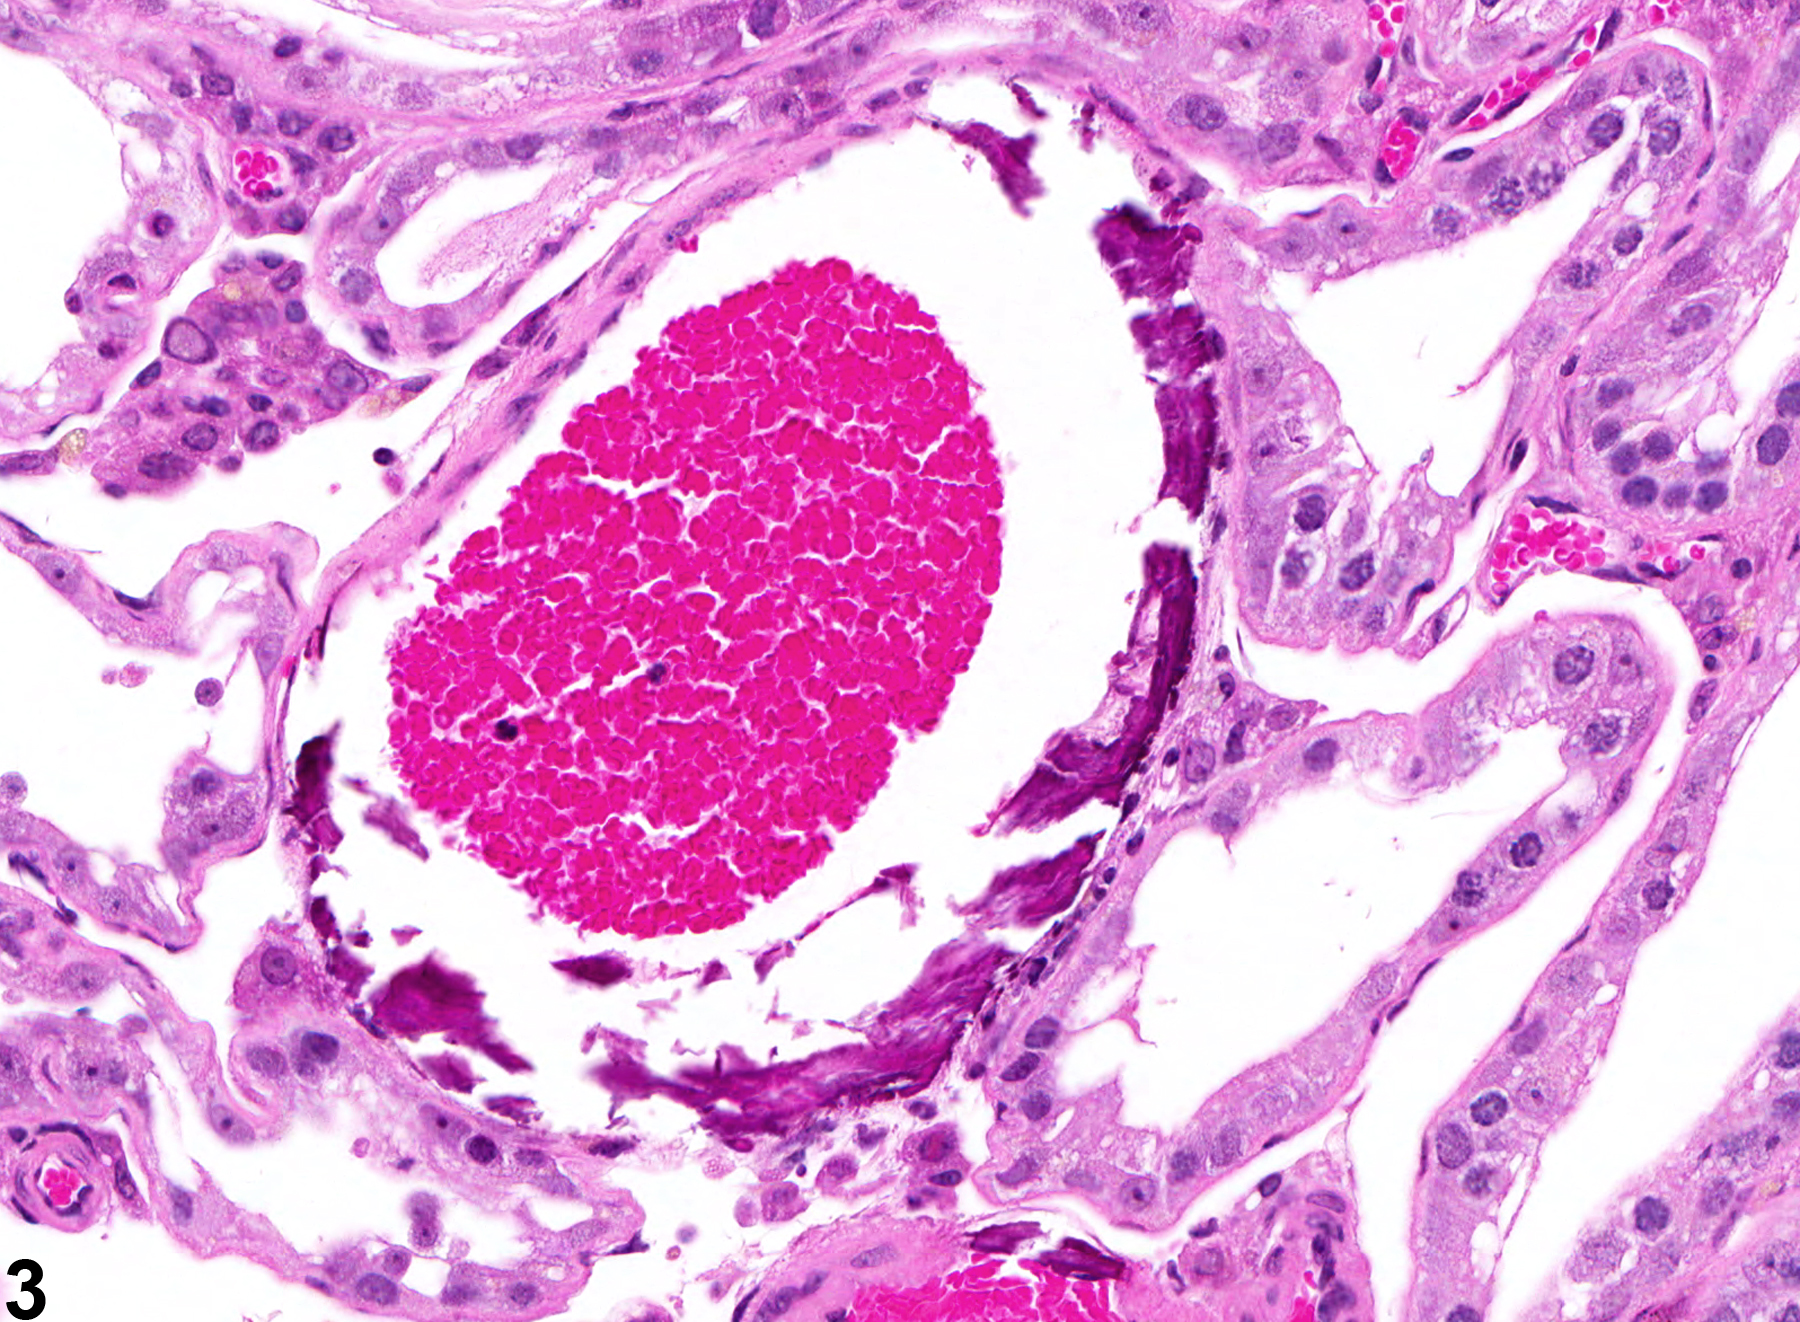 Image of mineralization in the testis from a male F344/N rat in a chronic study